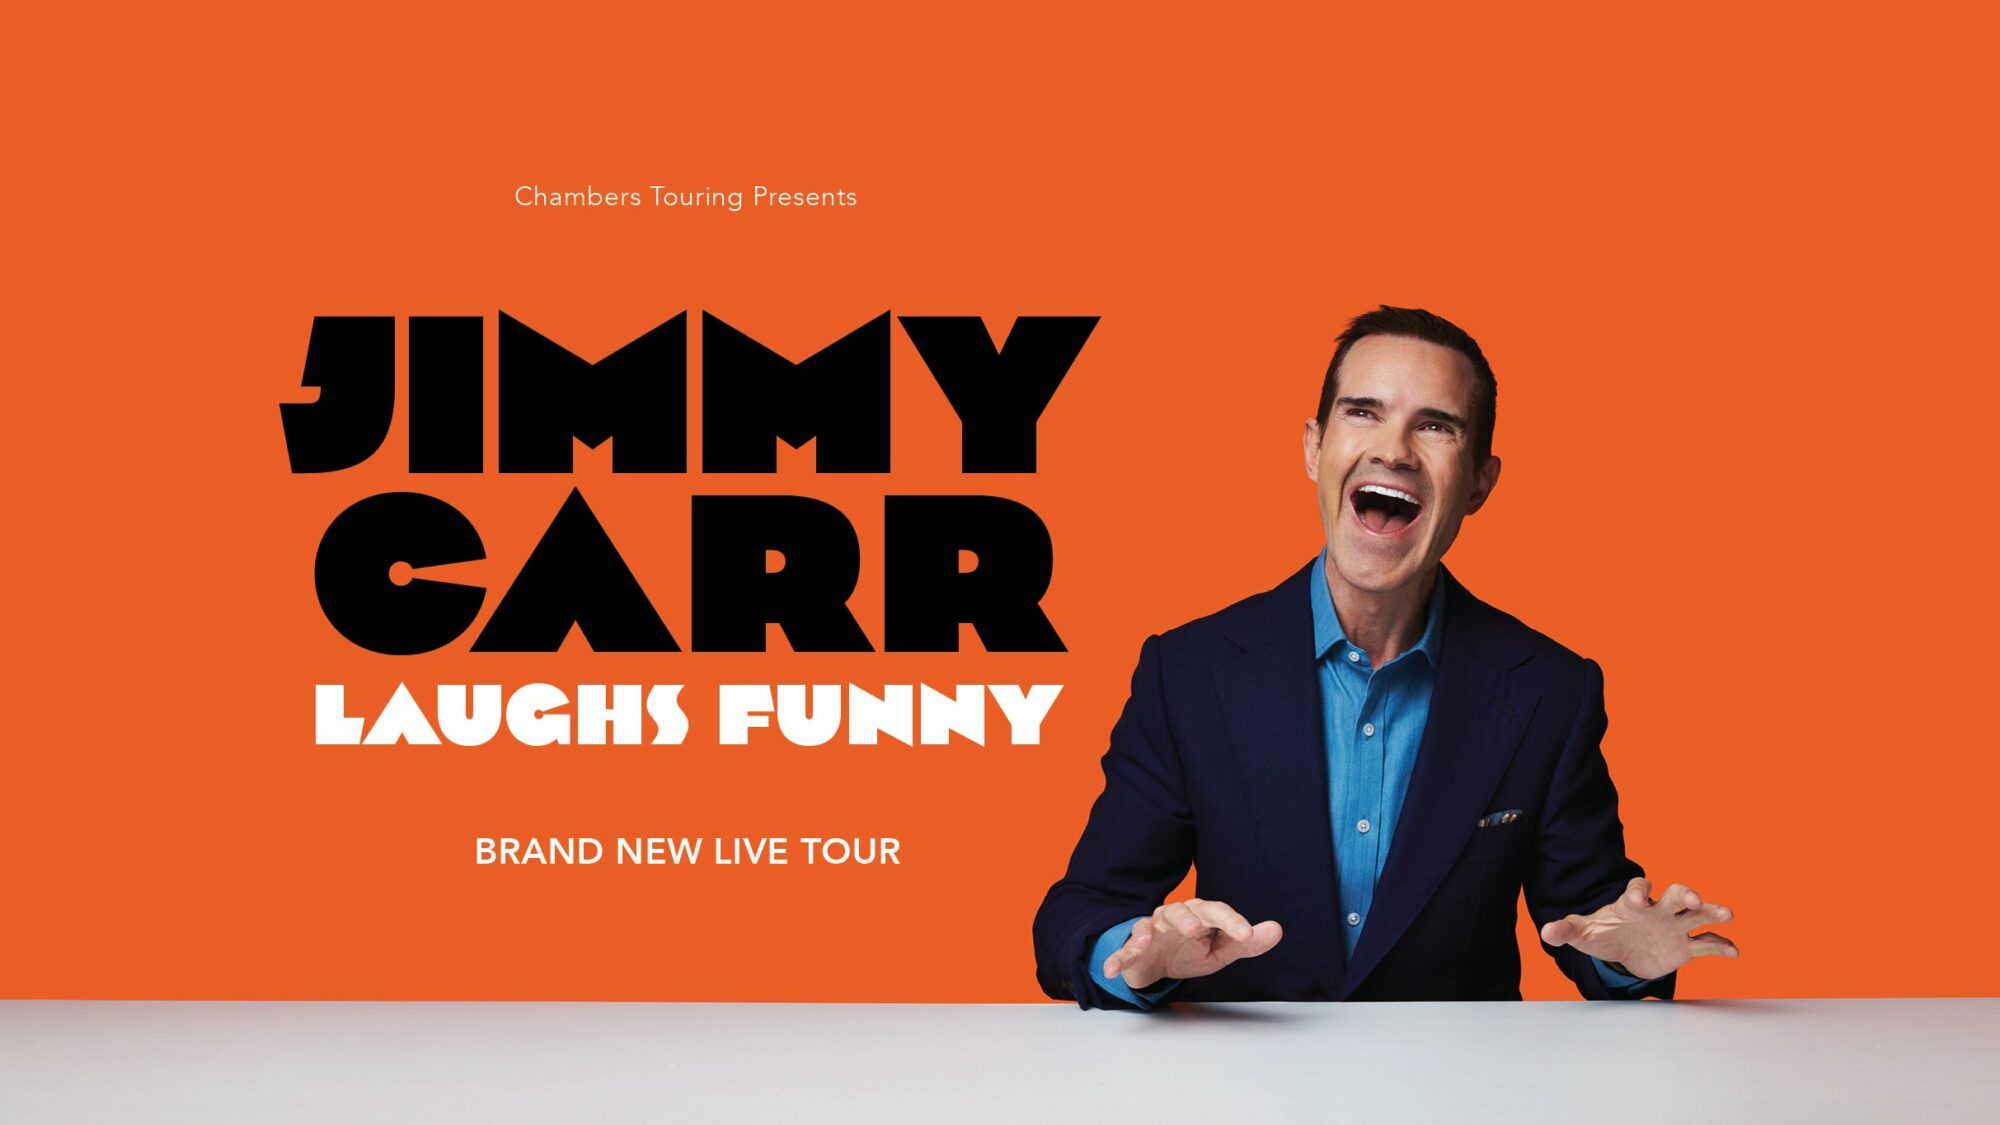 Image name Jimmy Carr Laughs Funny at York Barbican York the 1 image from the post Jimmy Carr - Premium Package - the Gallery at First Direct Arena, Leeds in Yorkshire.com.